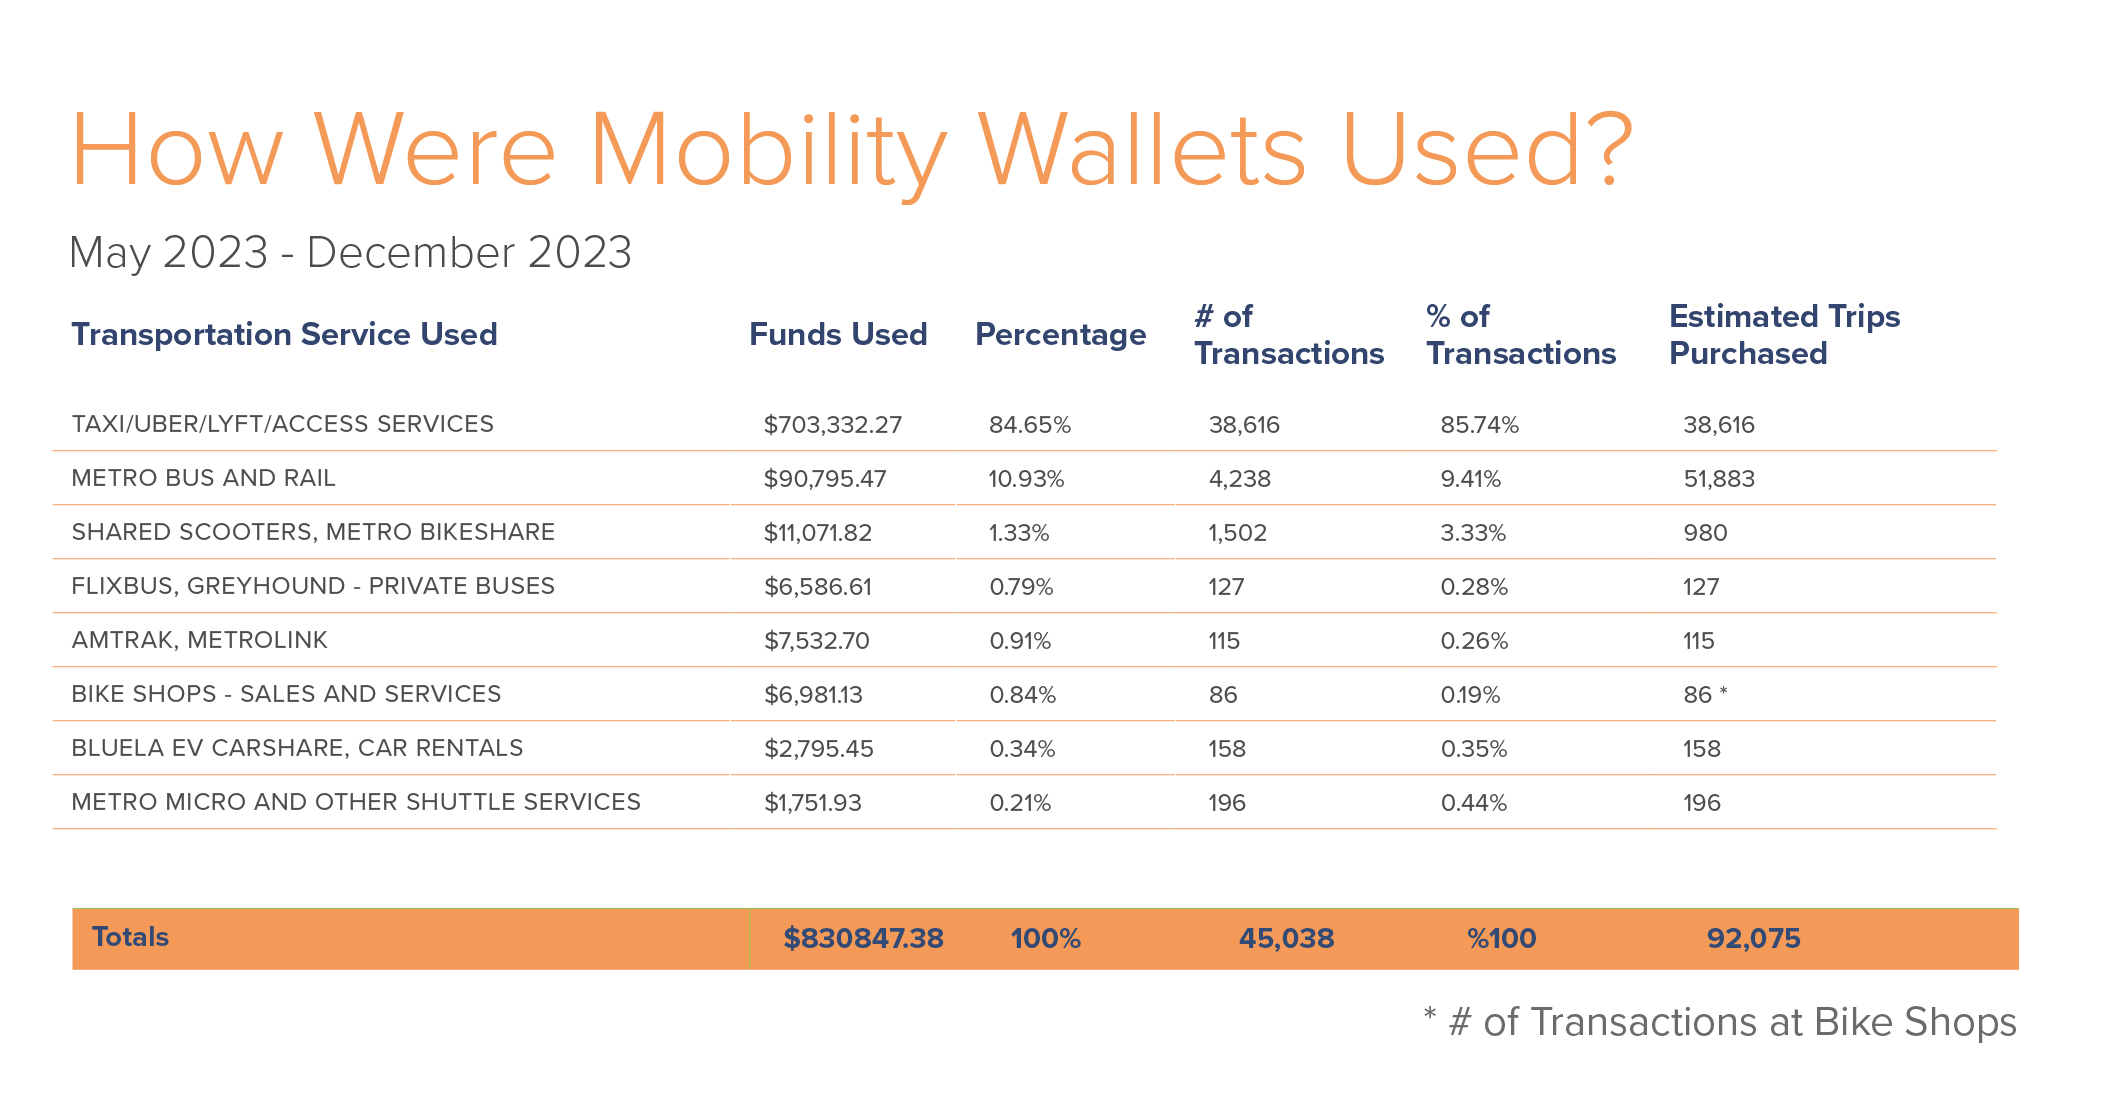 Mobility Wallet Used